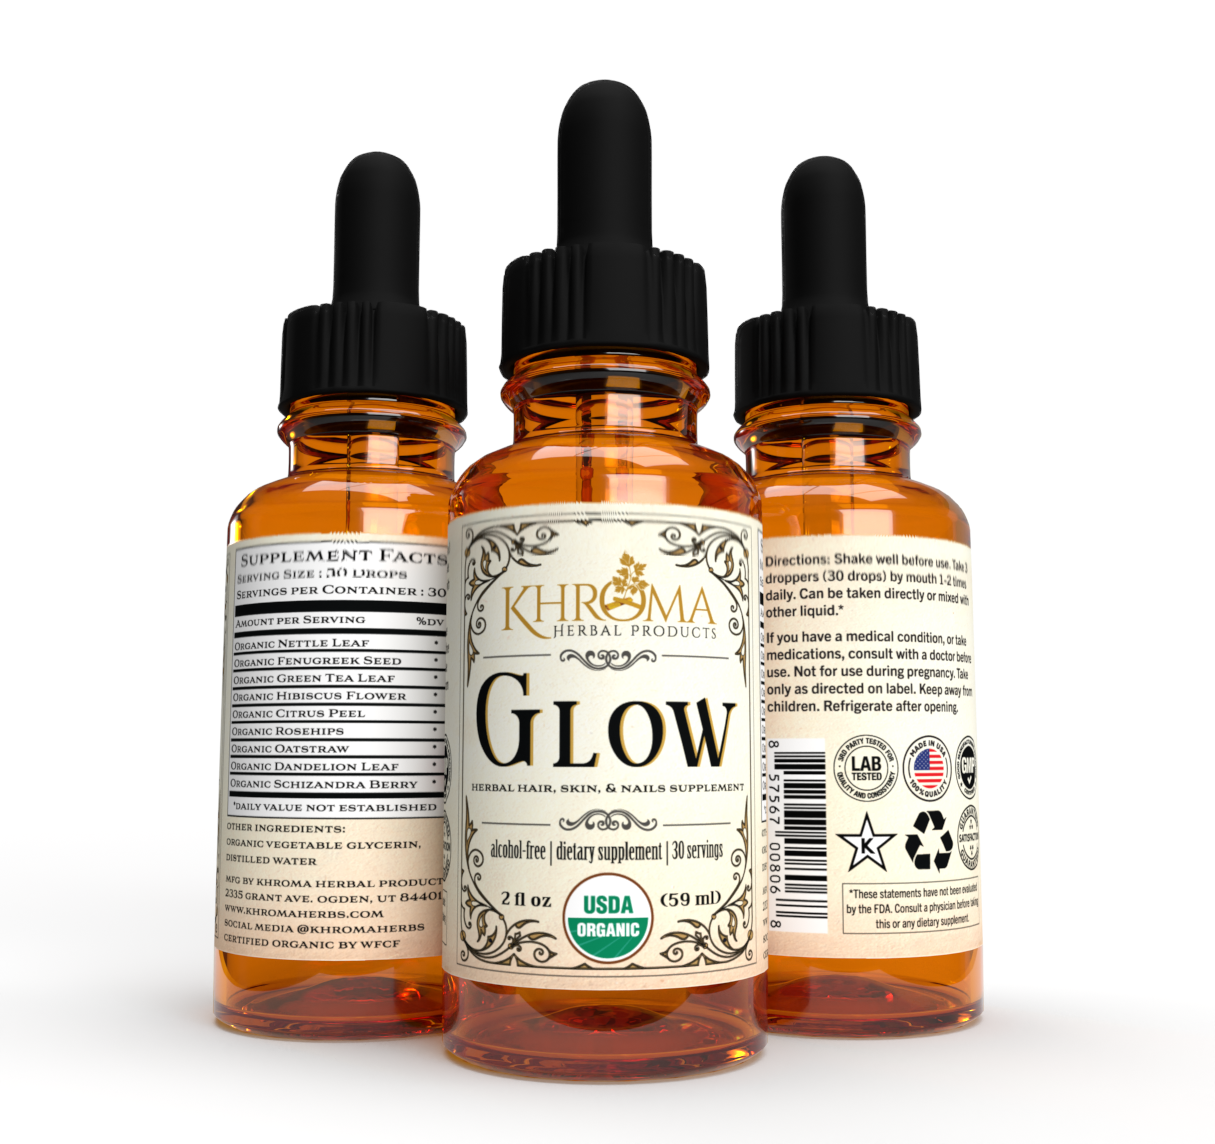 GLOW - Organic Hair, Skin, and Nails Supplement